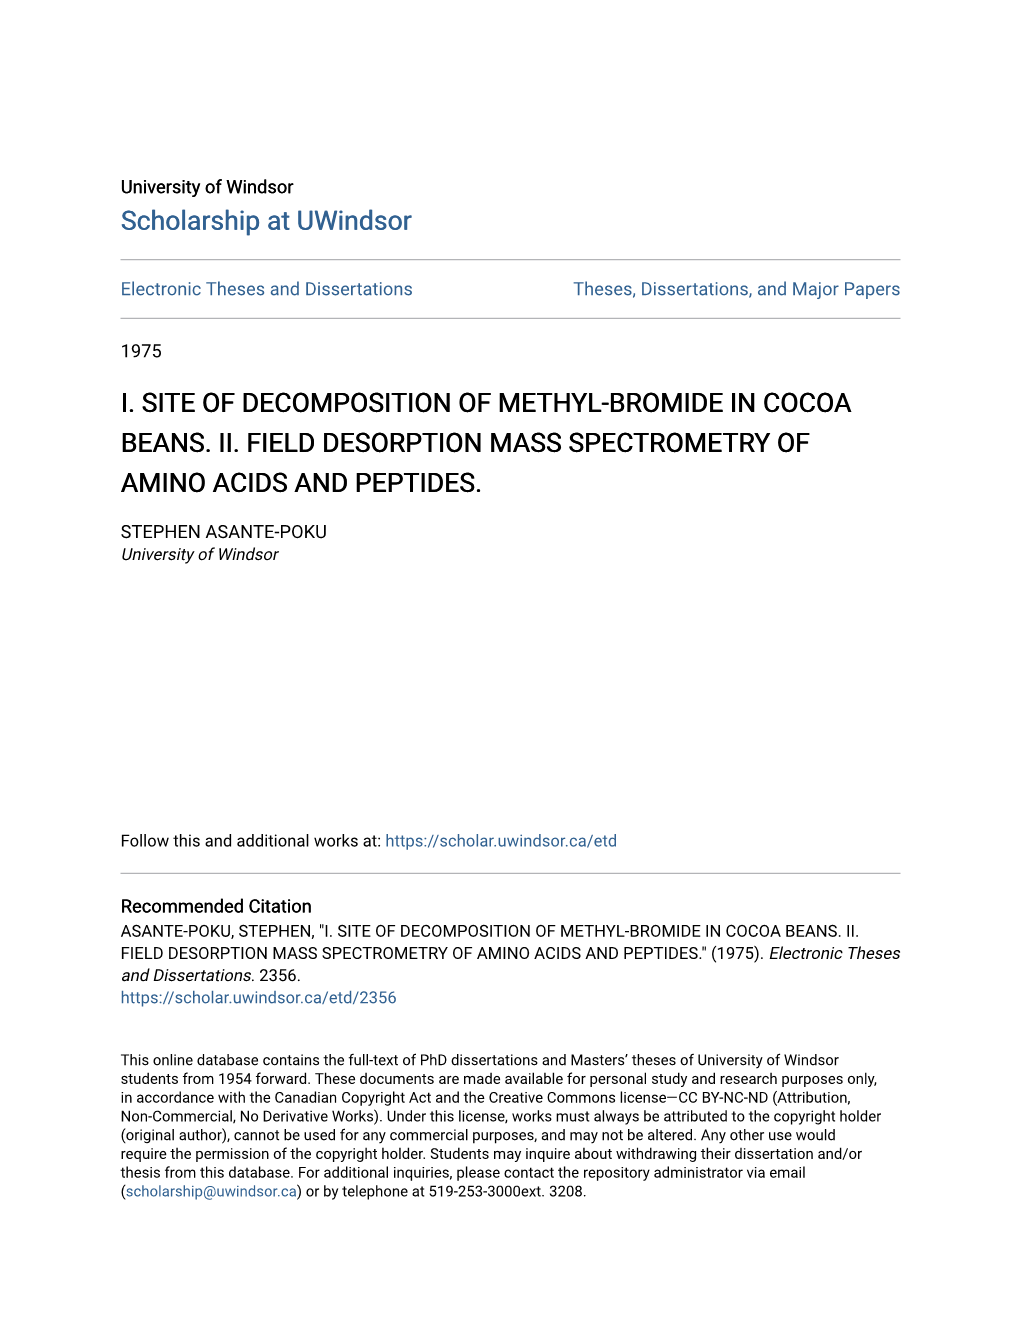 I. Site of Decomposition of Methyl-Bromide in Cocoa Beans